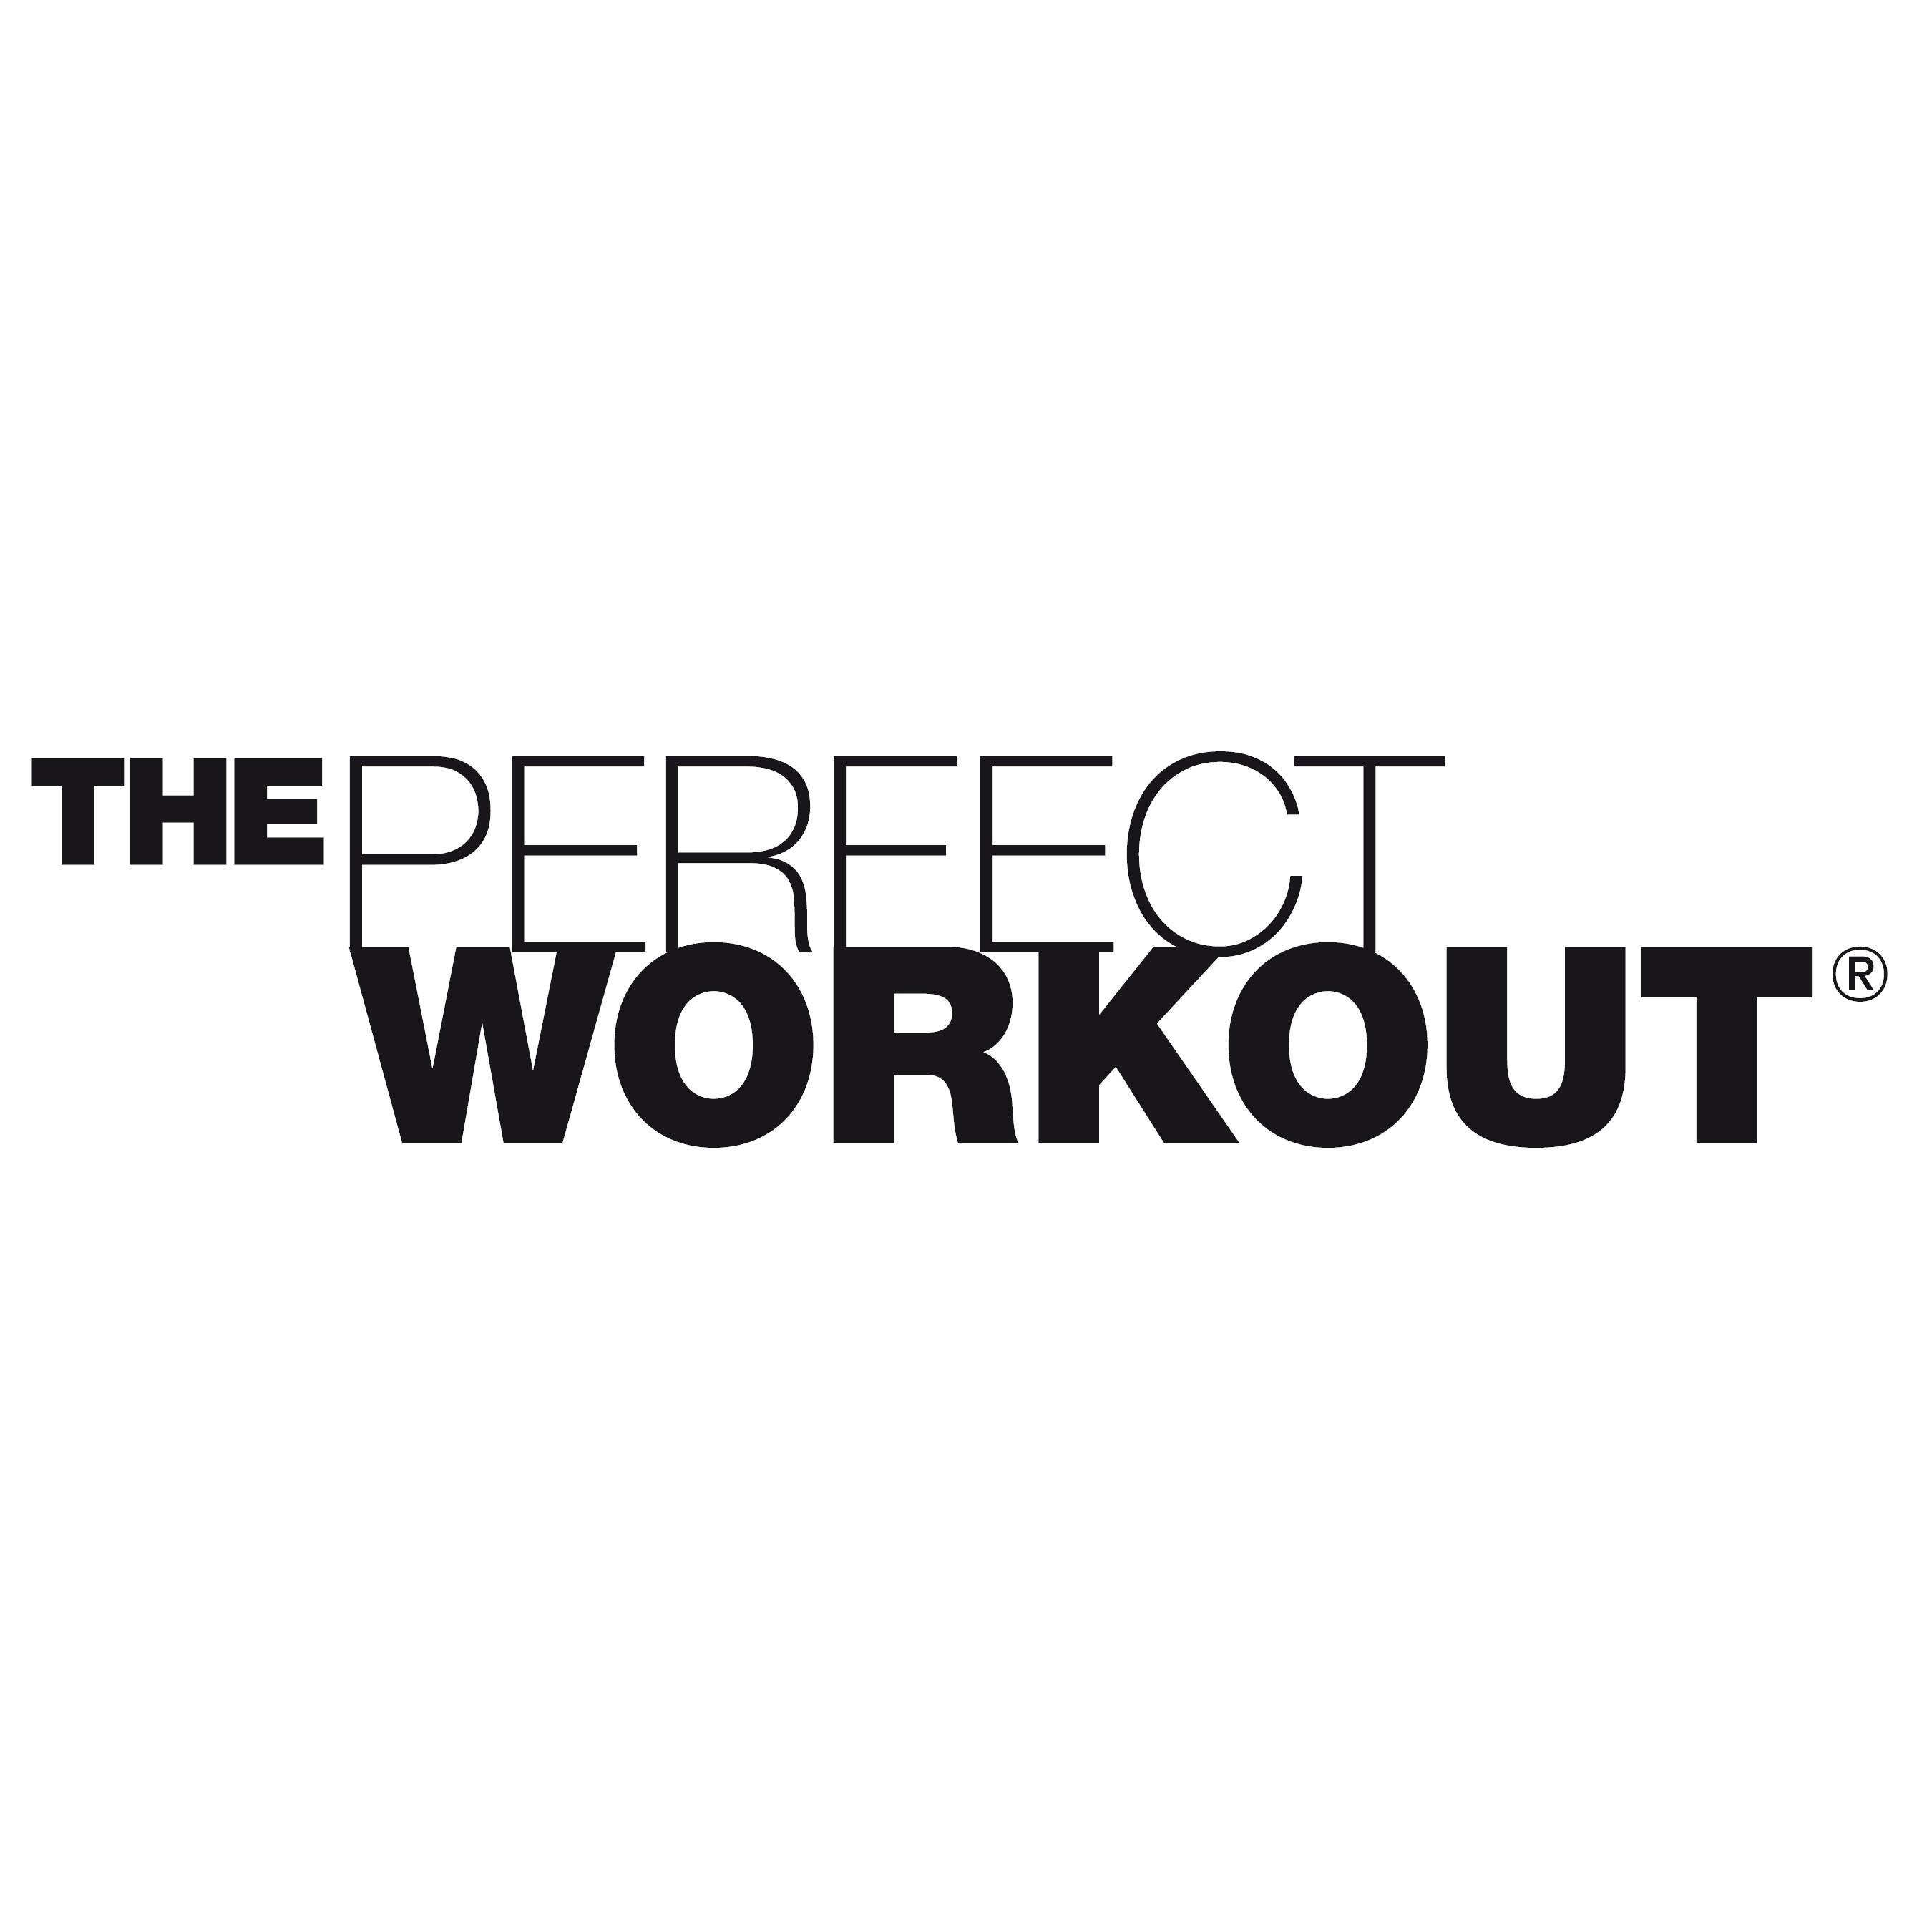 The Perfect Workout - Orland Park, IL 60462 - (844)403-1120 | ShowMeLocal.com